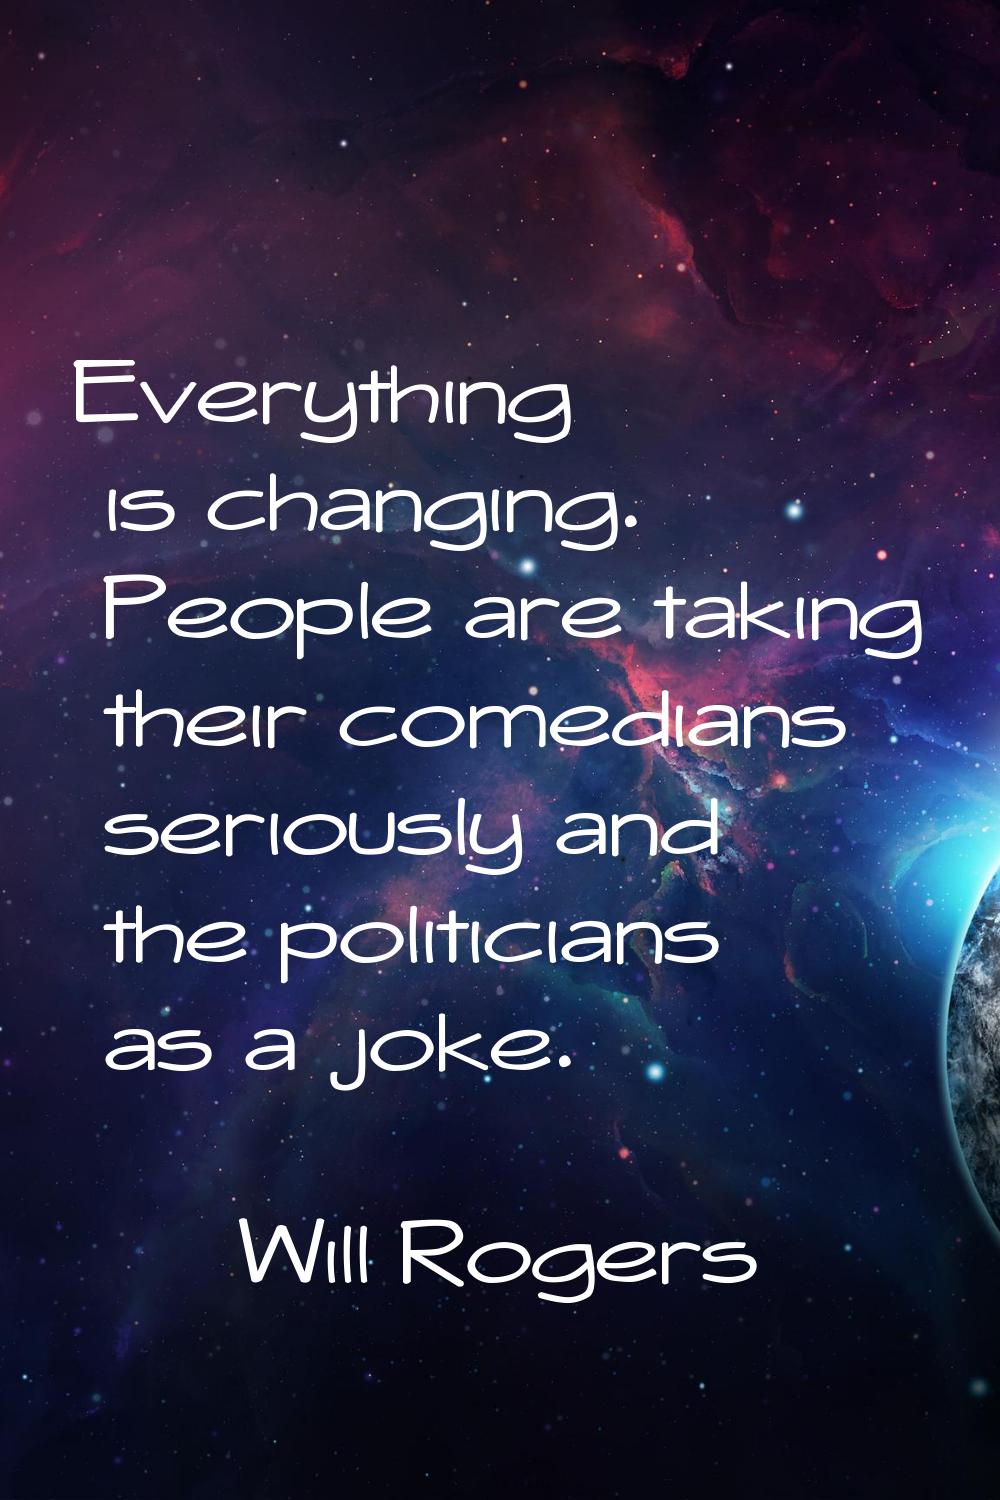 Everything is changing. People are taking their comedians seriously and the politicians as a joke.